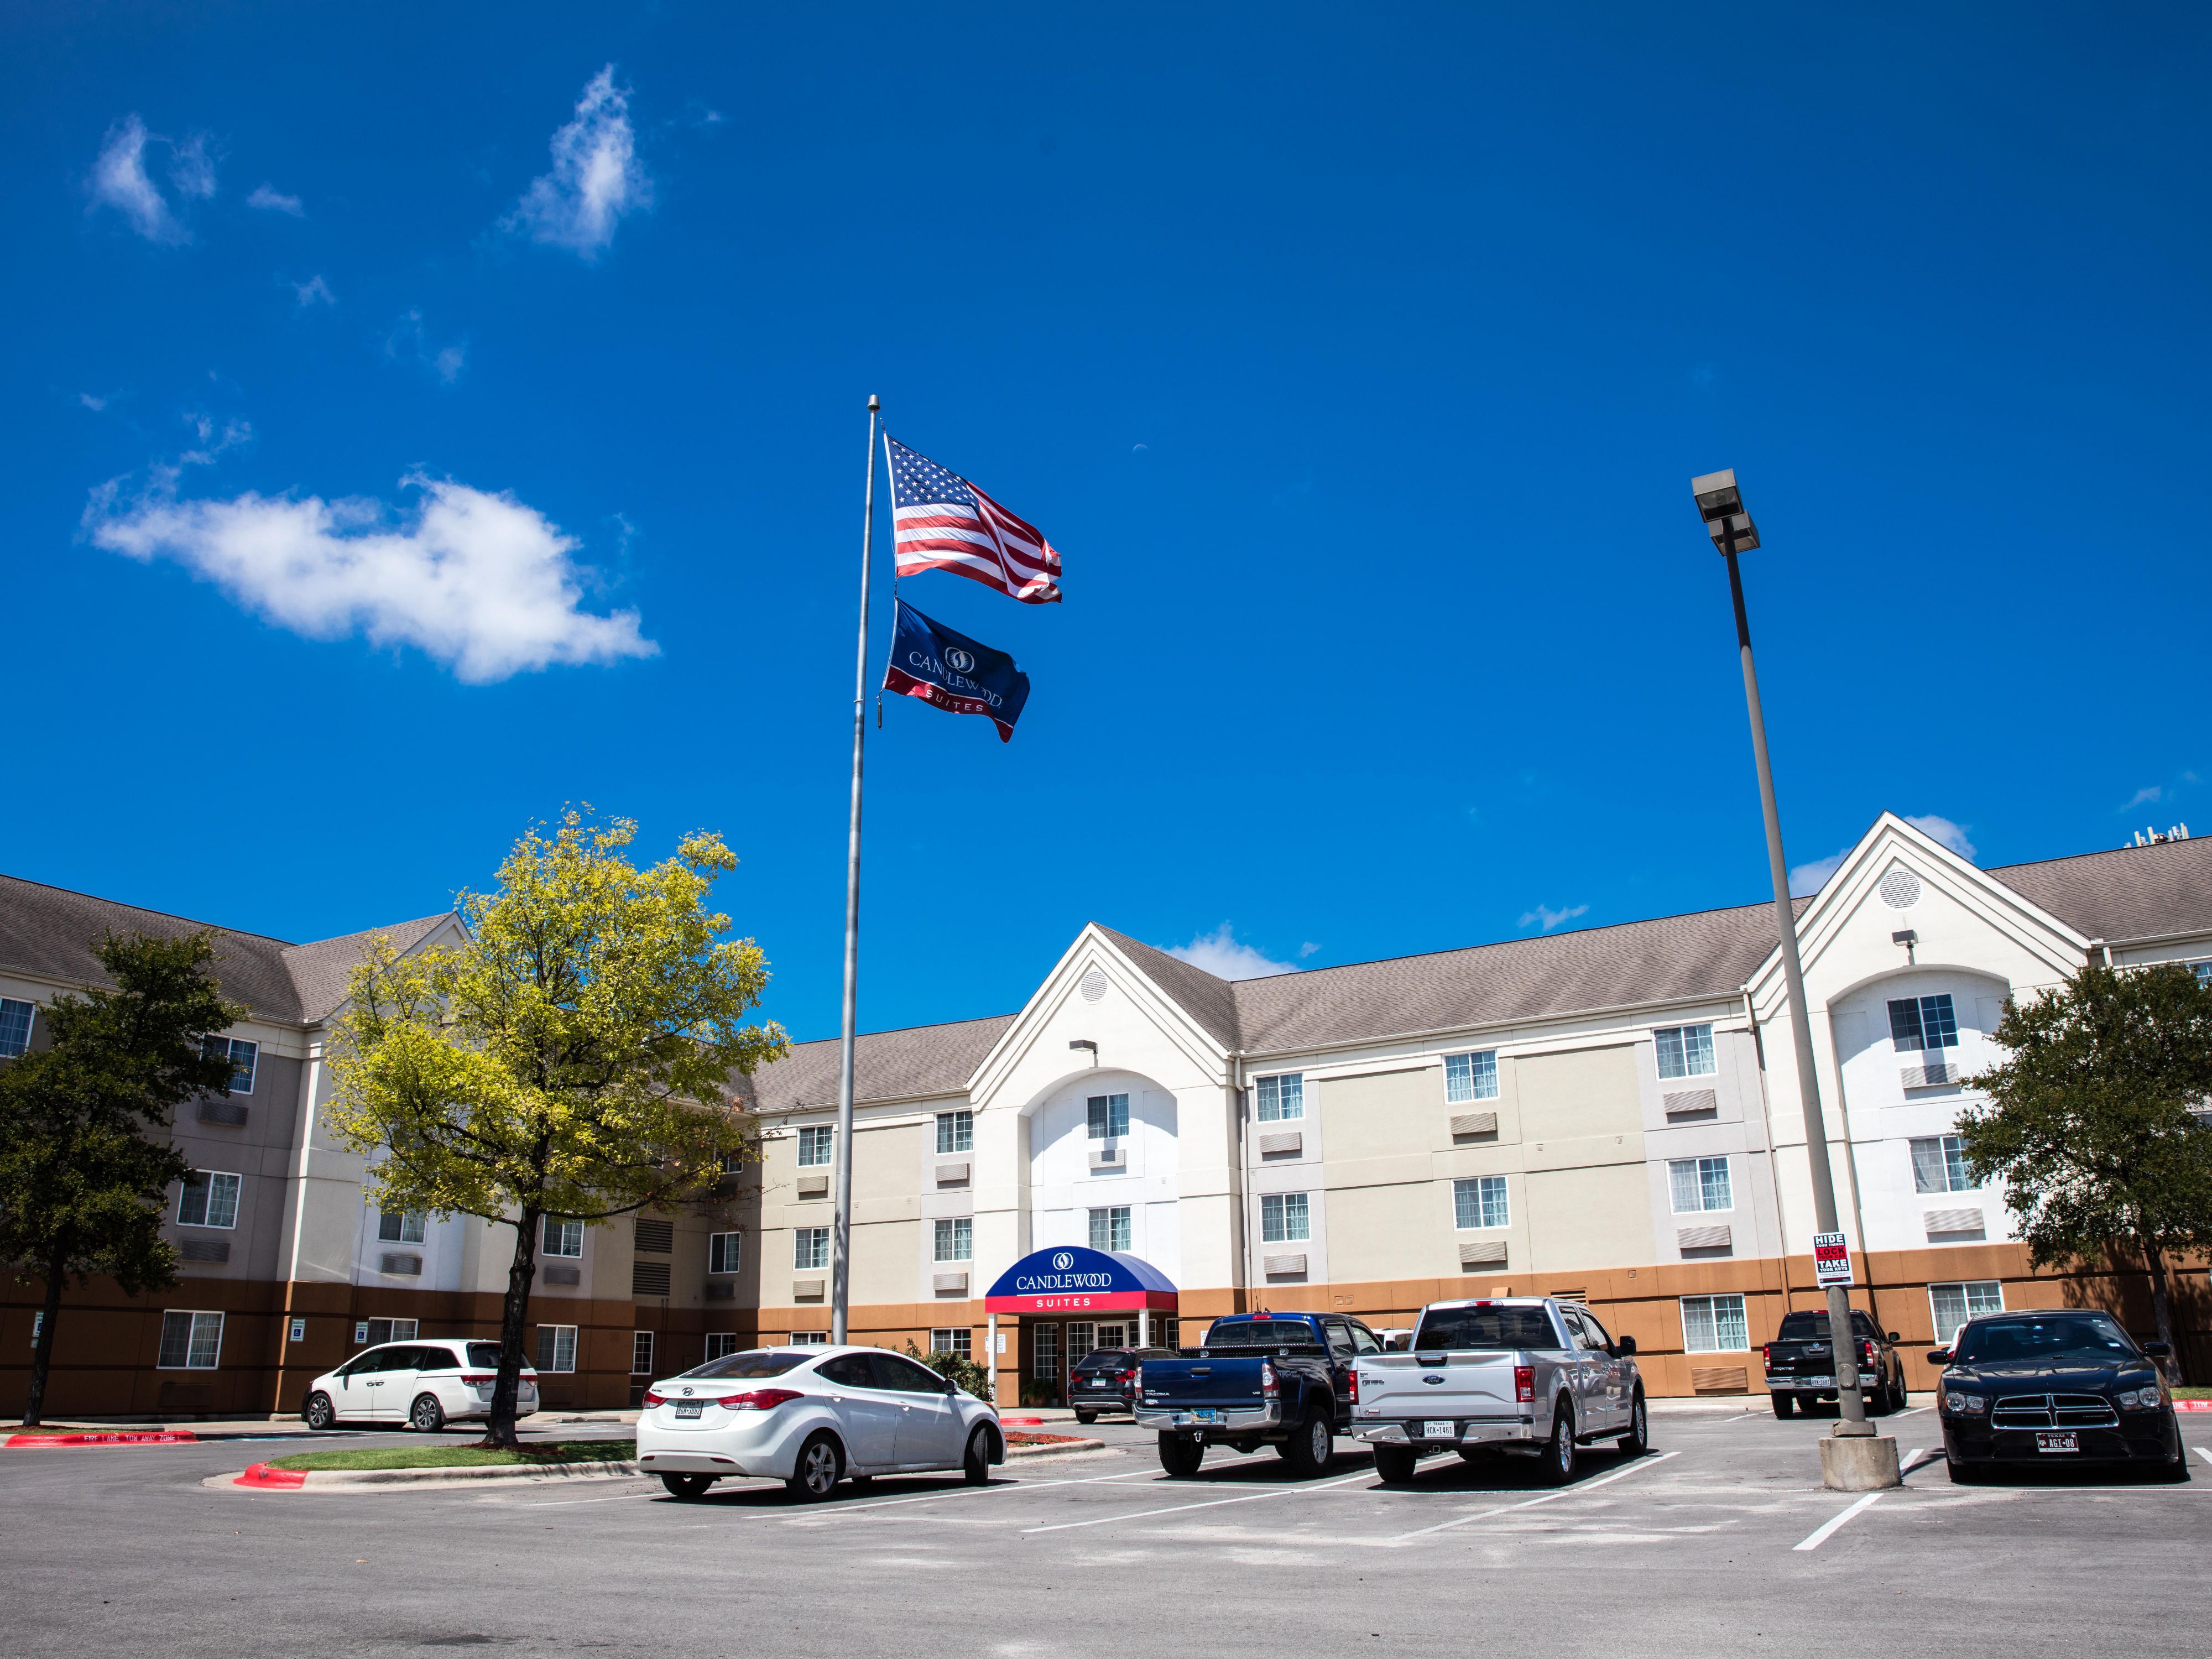 Candlewood Suites Austin Extended Stay Hotels - 